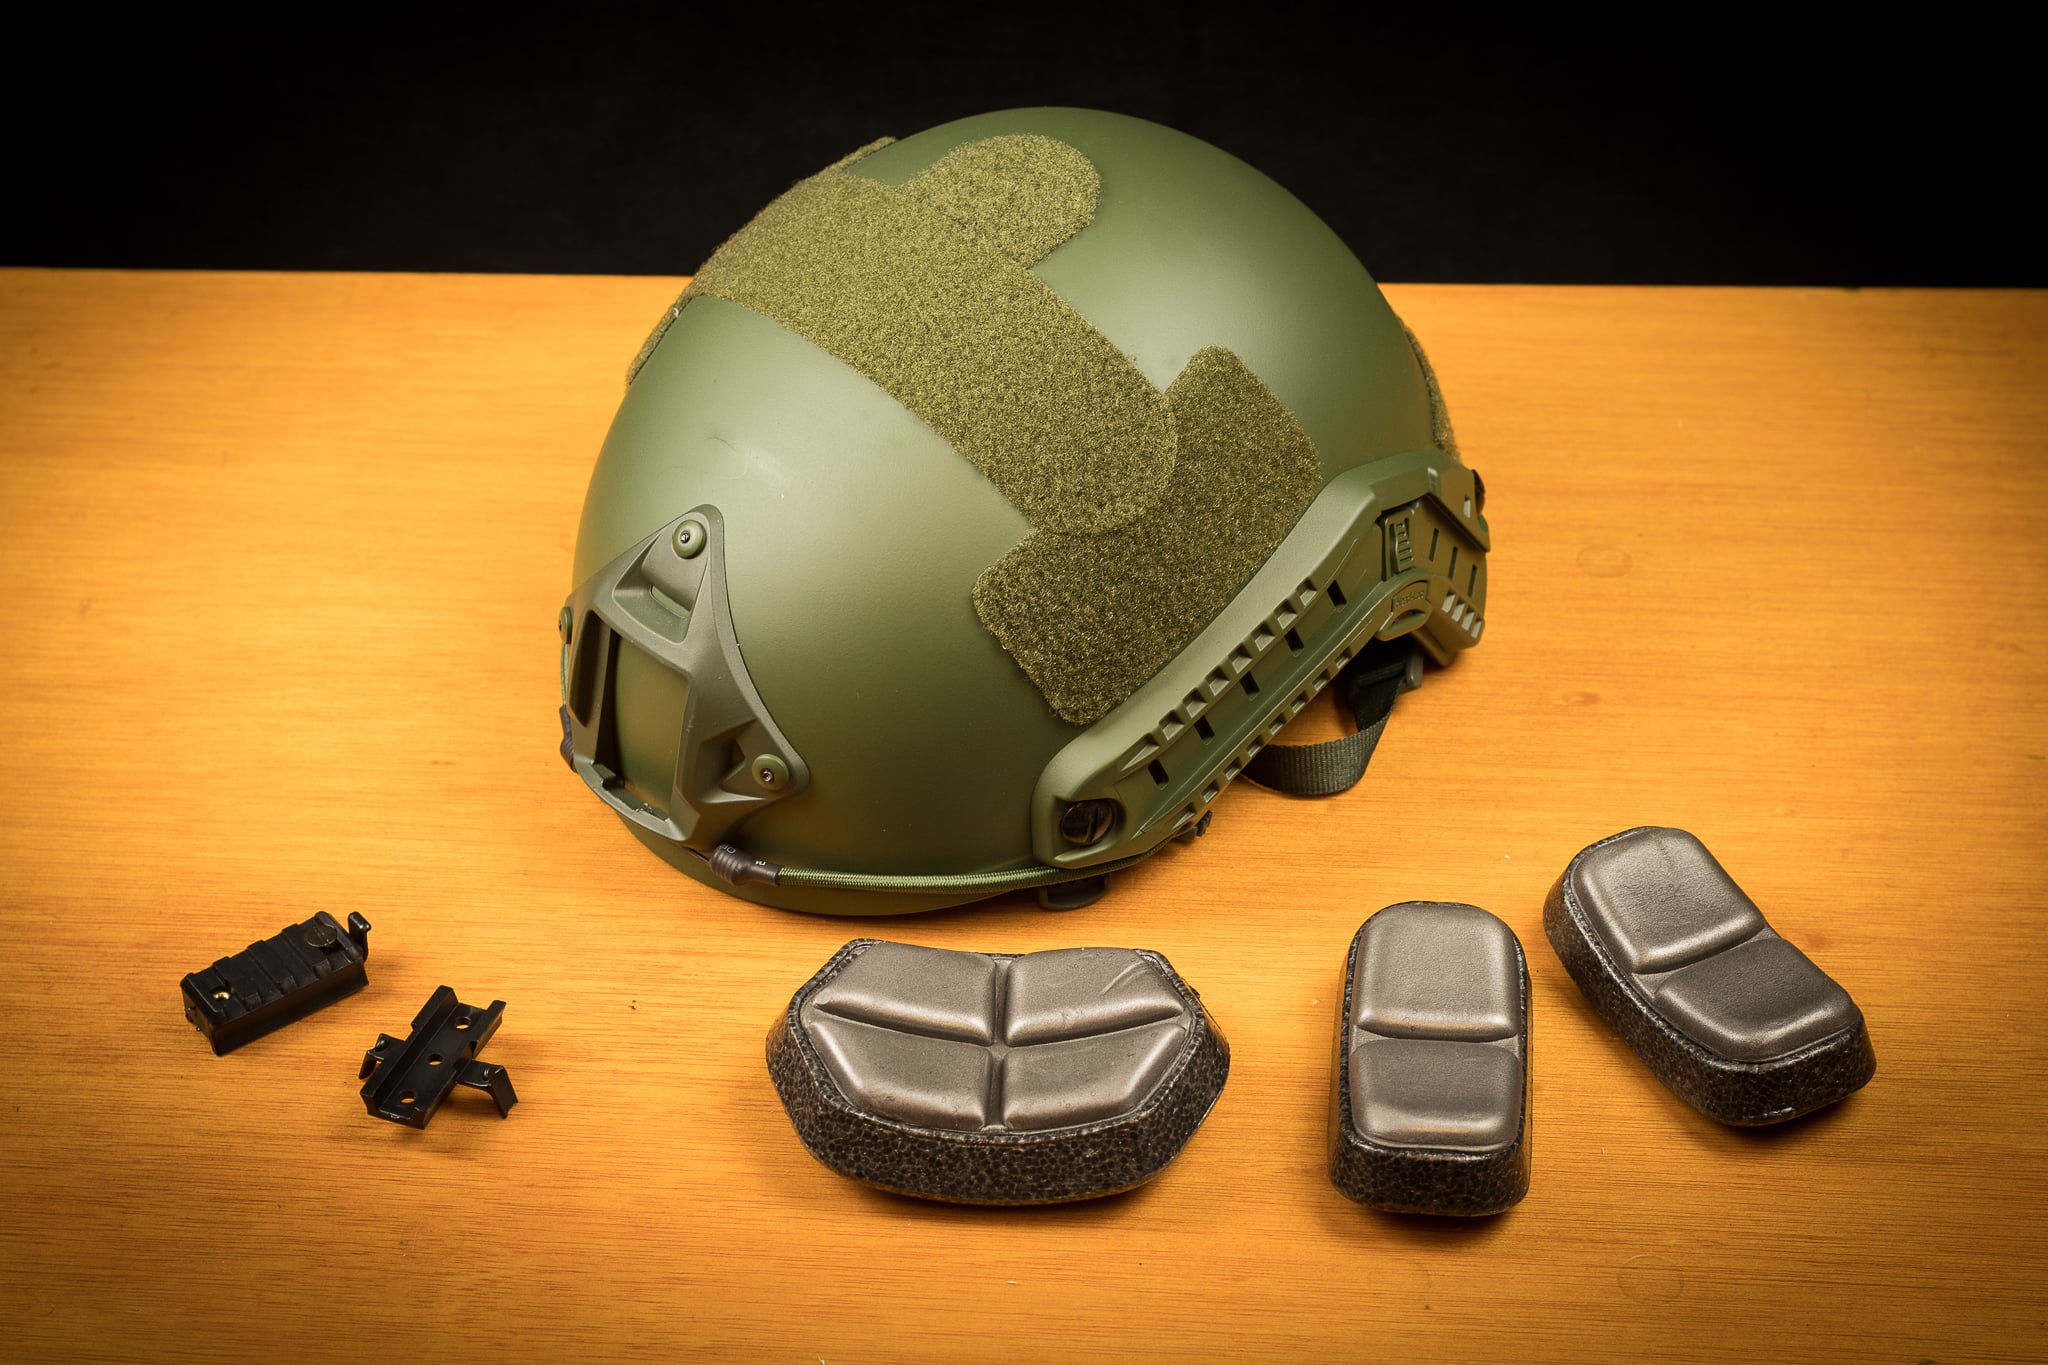 Viper FAST Helmet with Accessories